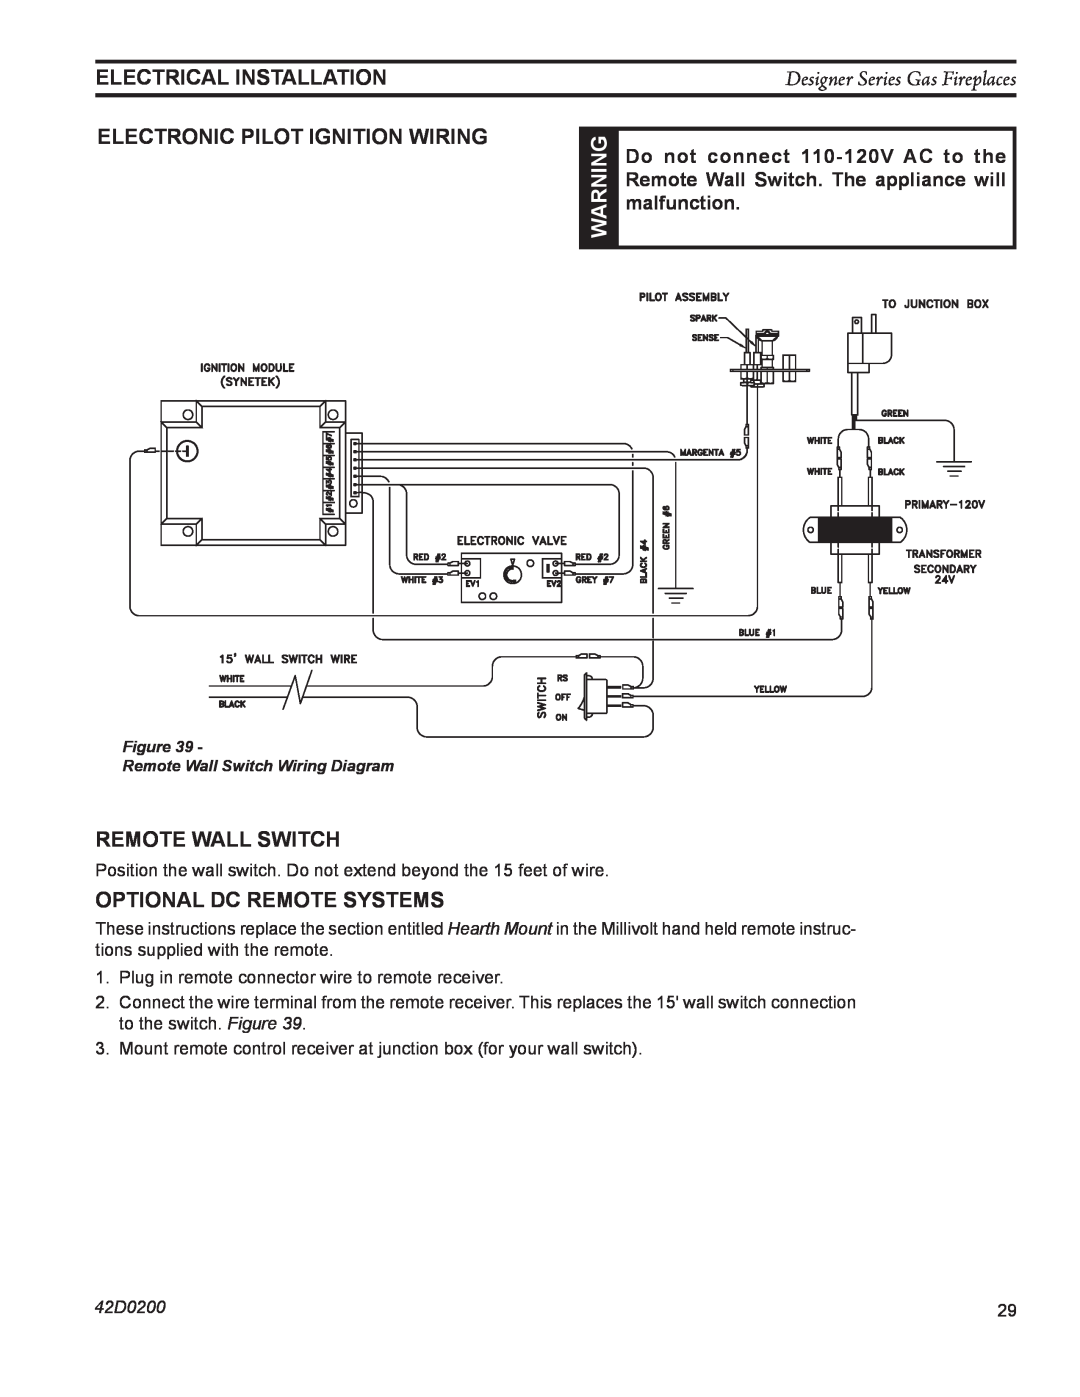 Monessen Hearth CR, PF, 624DV(ST Electronic Pilot Ignition Wiring, Remote Wall Switch, Optional DC Remote Systems, 42D0200 